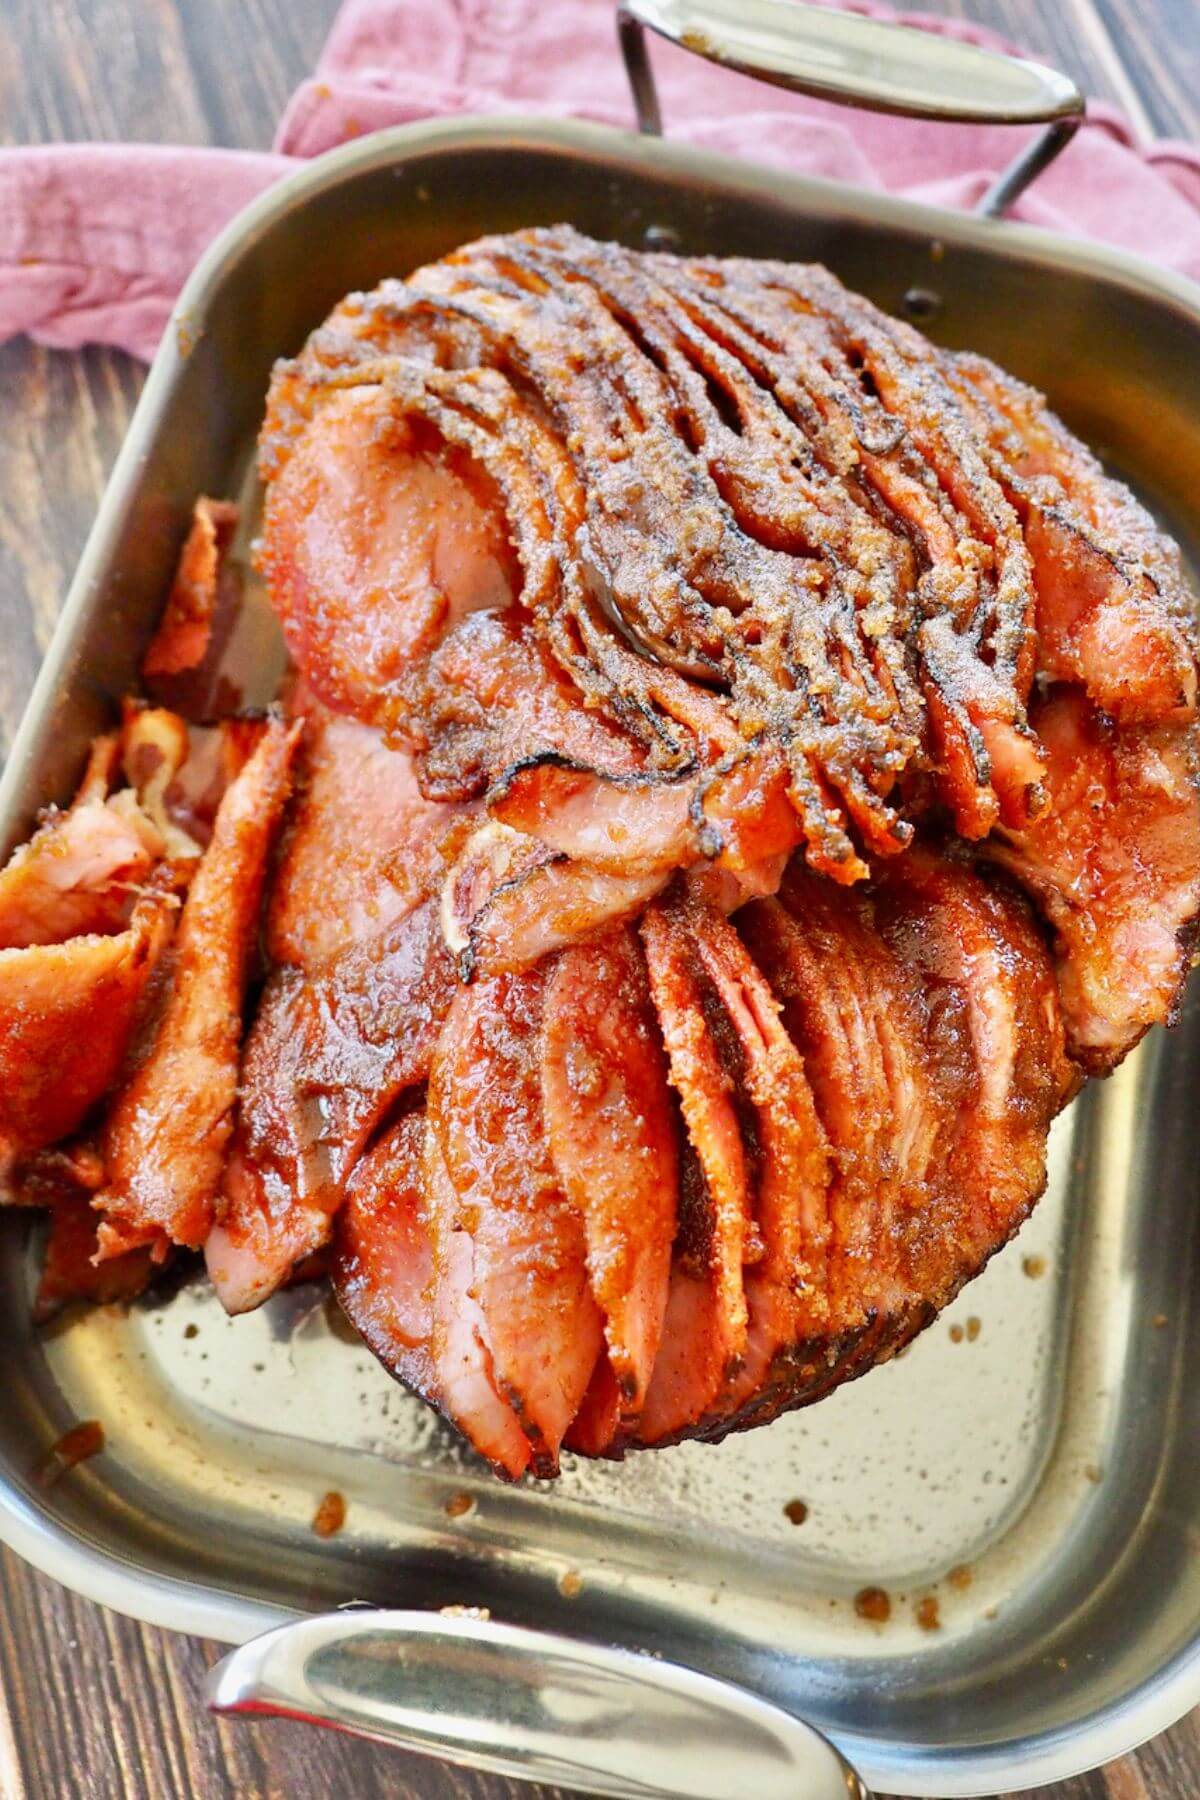 Costco Spiral Sliced ham crusty with a sugar and spice glaze baked on.